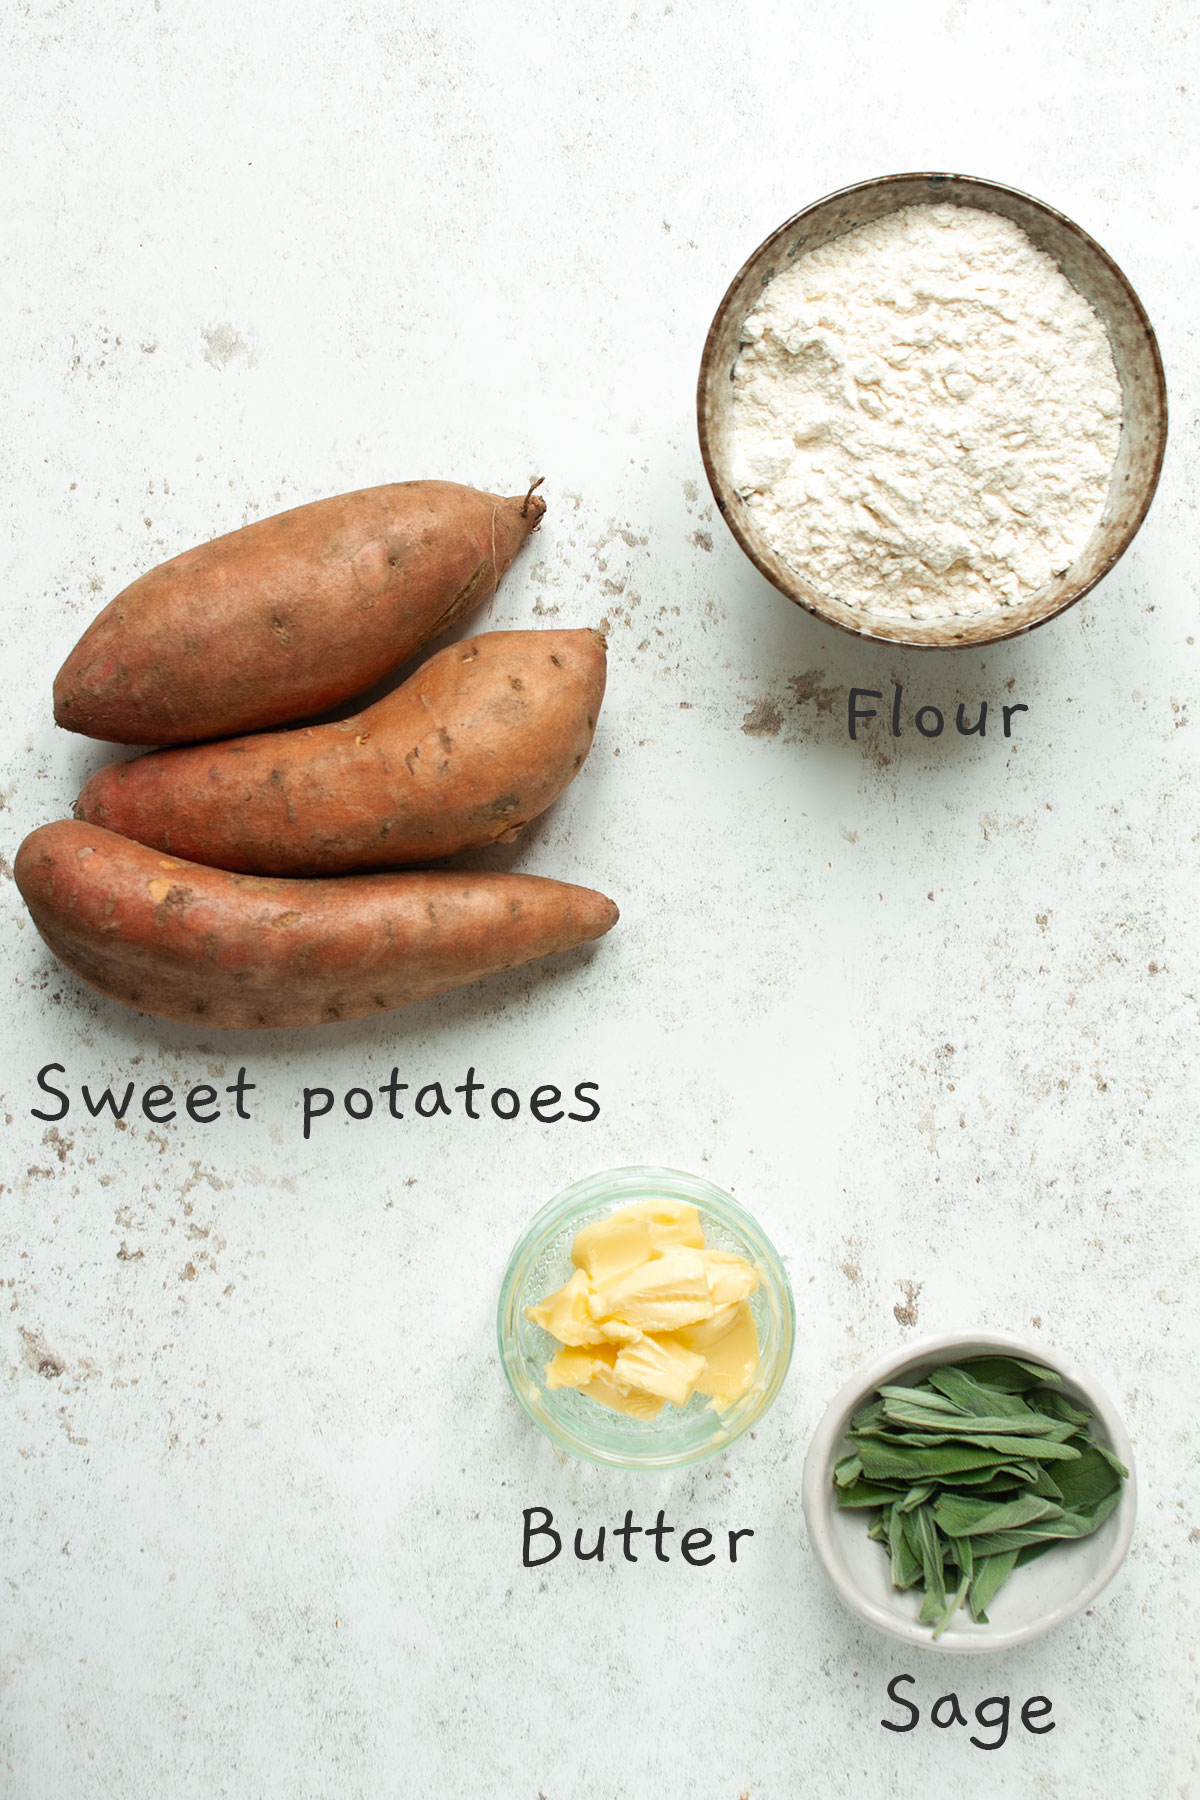 Photograph of the ingredients for Sweet Potato Gnocchi.